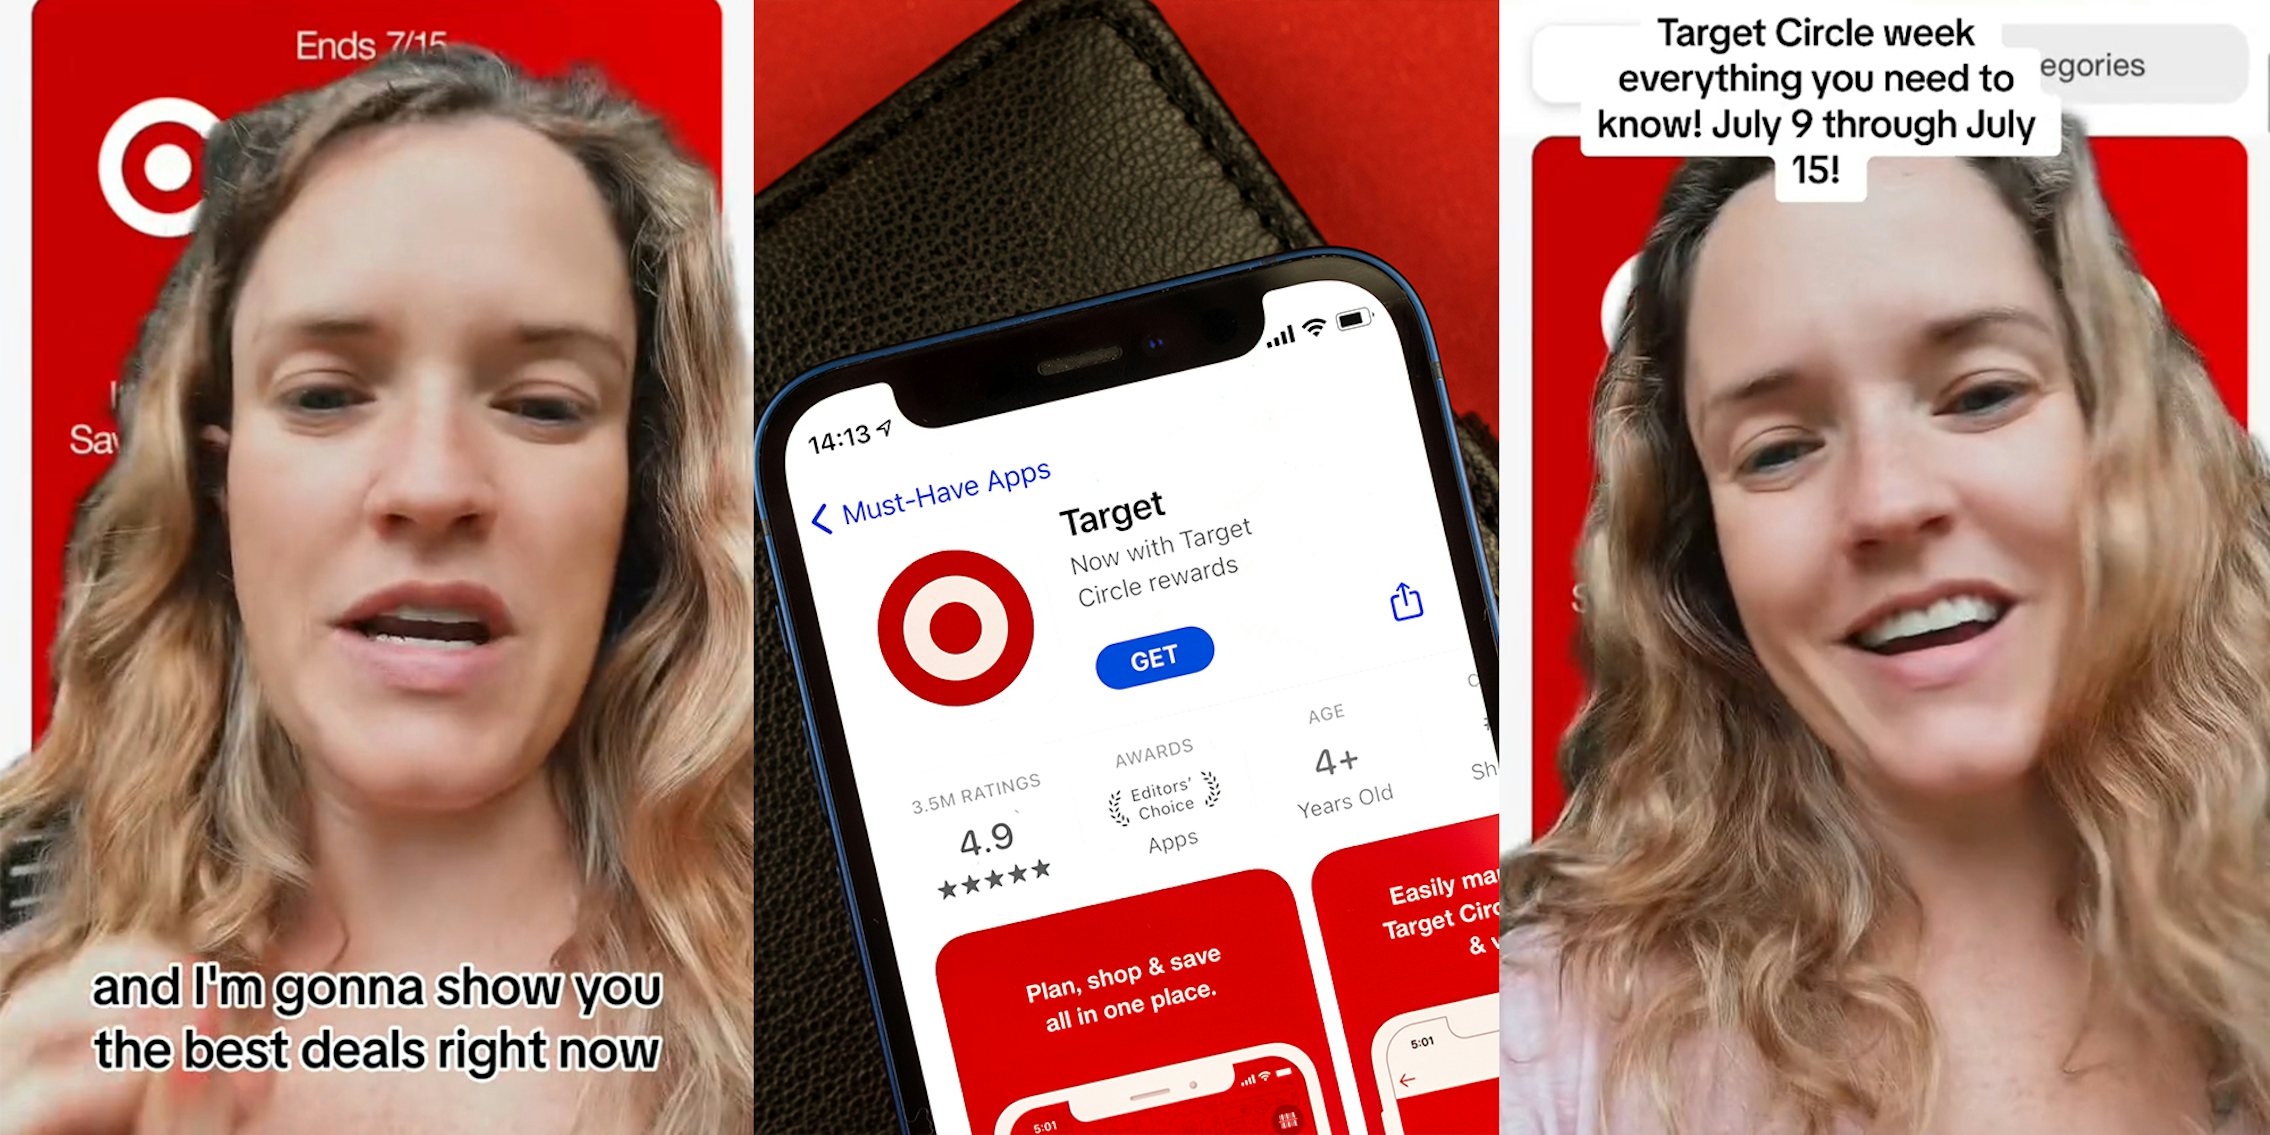 t's Target Circle Week. You'll need to go into the app and save sales